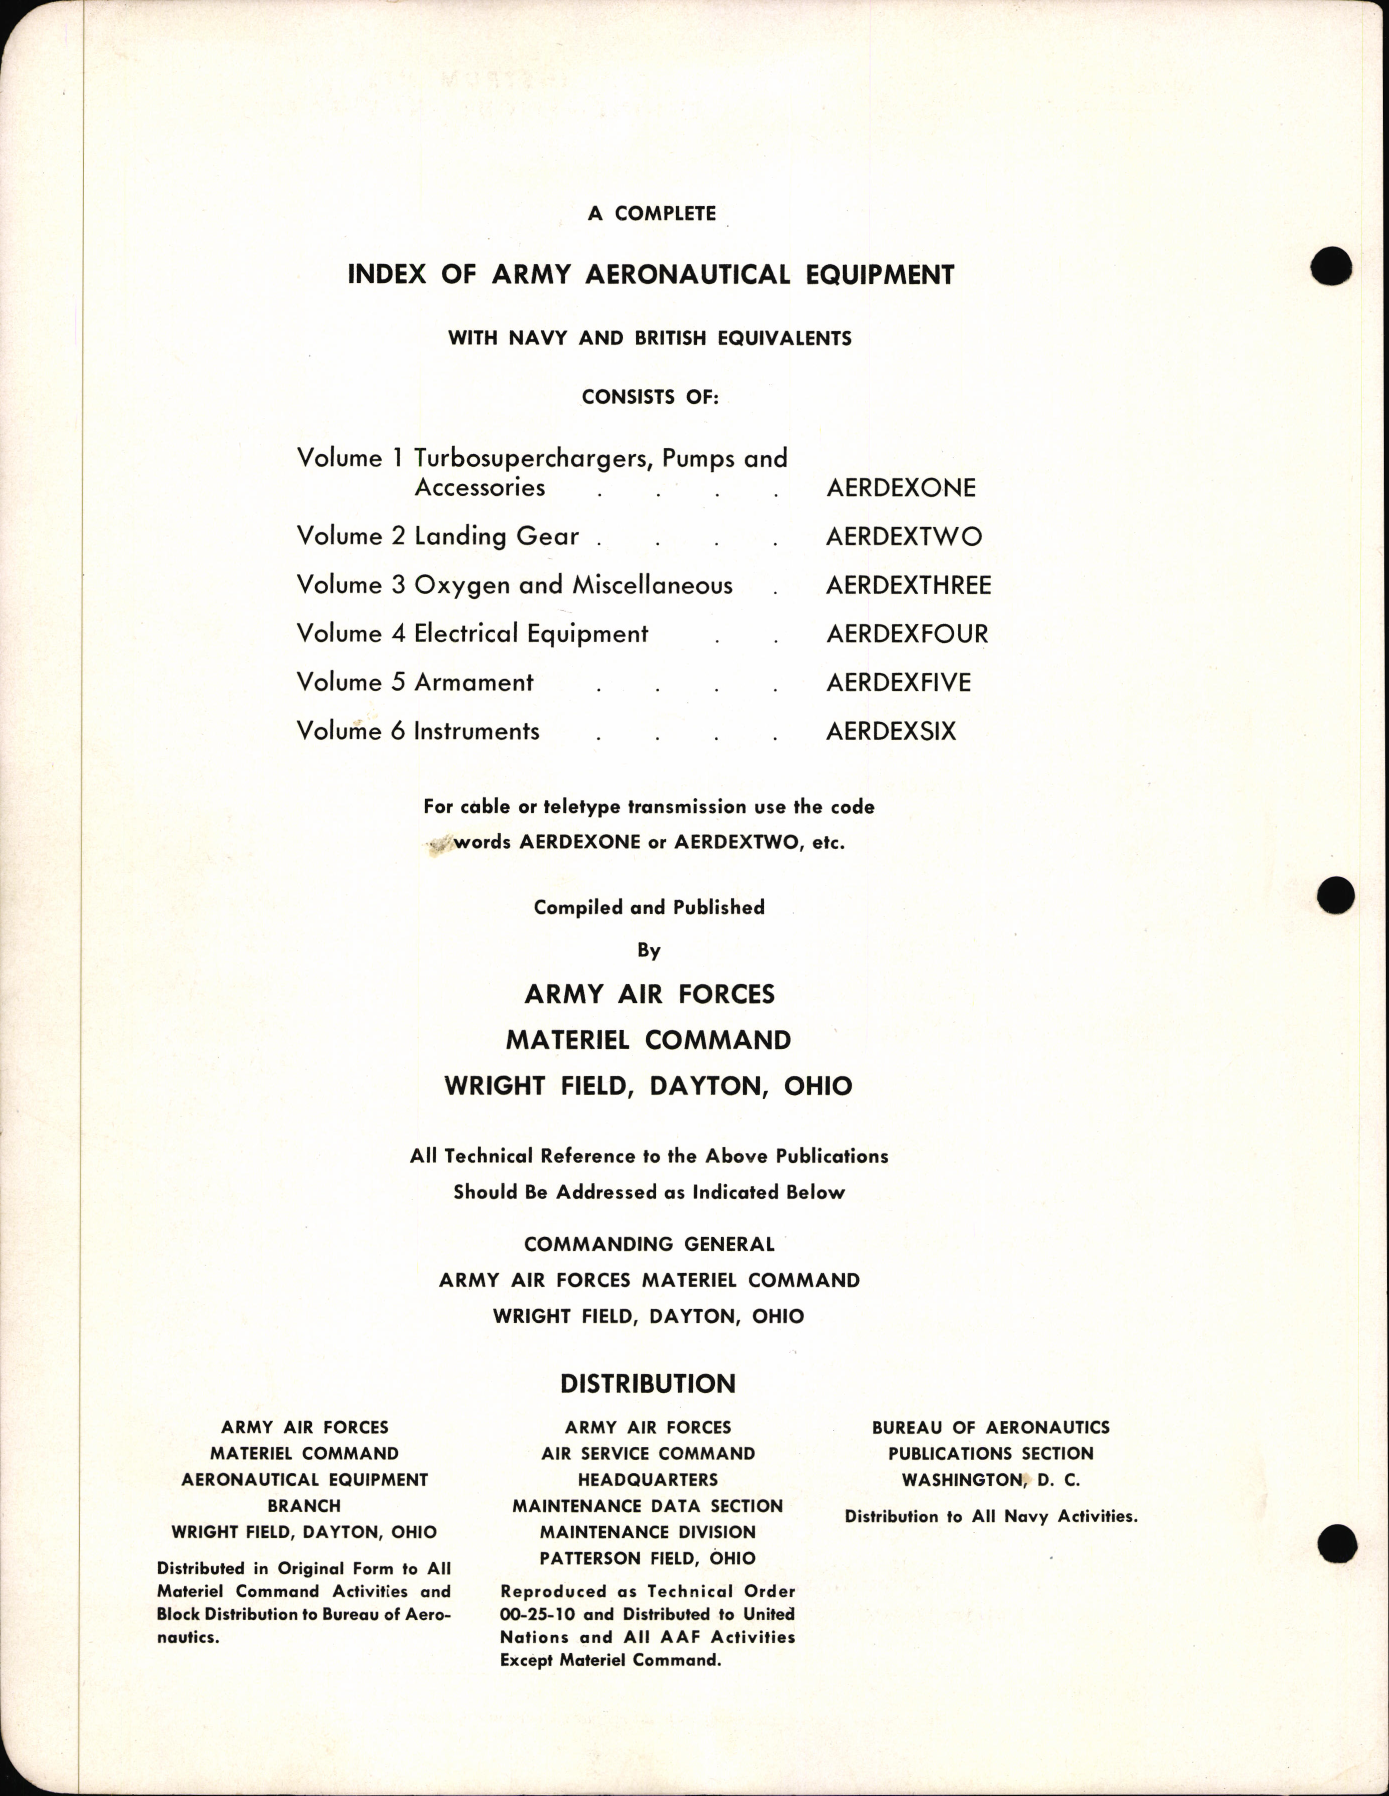 Sample page  3 from AirCorps Library document: Instruments - Index of Aeronautical Equipment - Volume 6